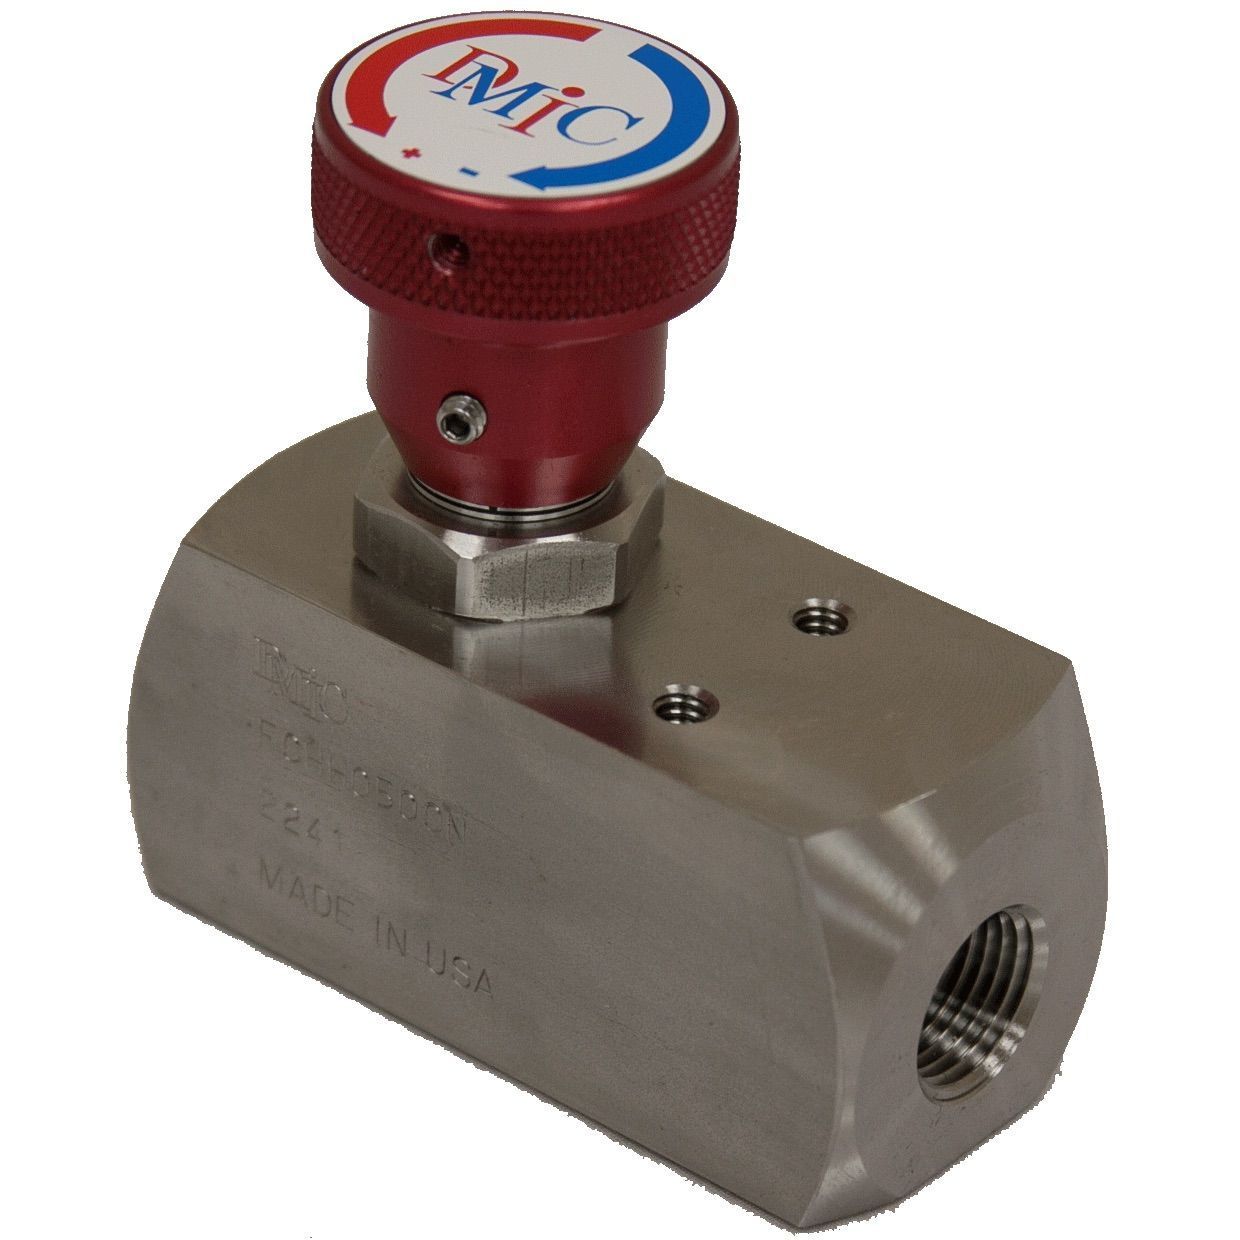 FCHH-0750N-2221 : DMIC Flow Control, Unidirectional, with Integrated Check, 3/4" NPT, 316SS, 10000psi